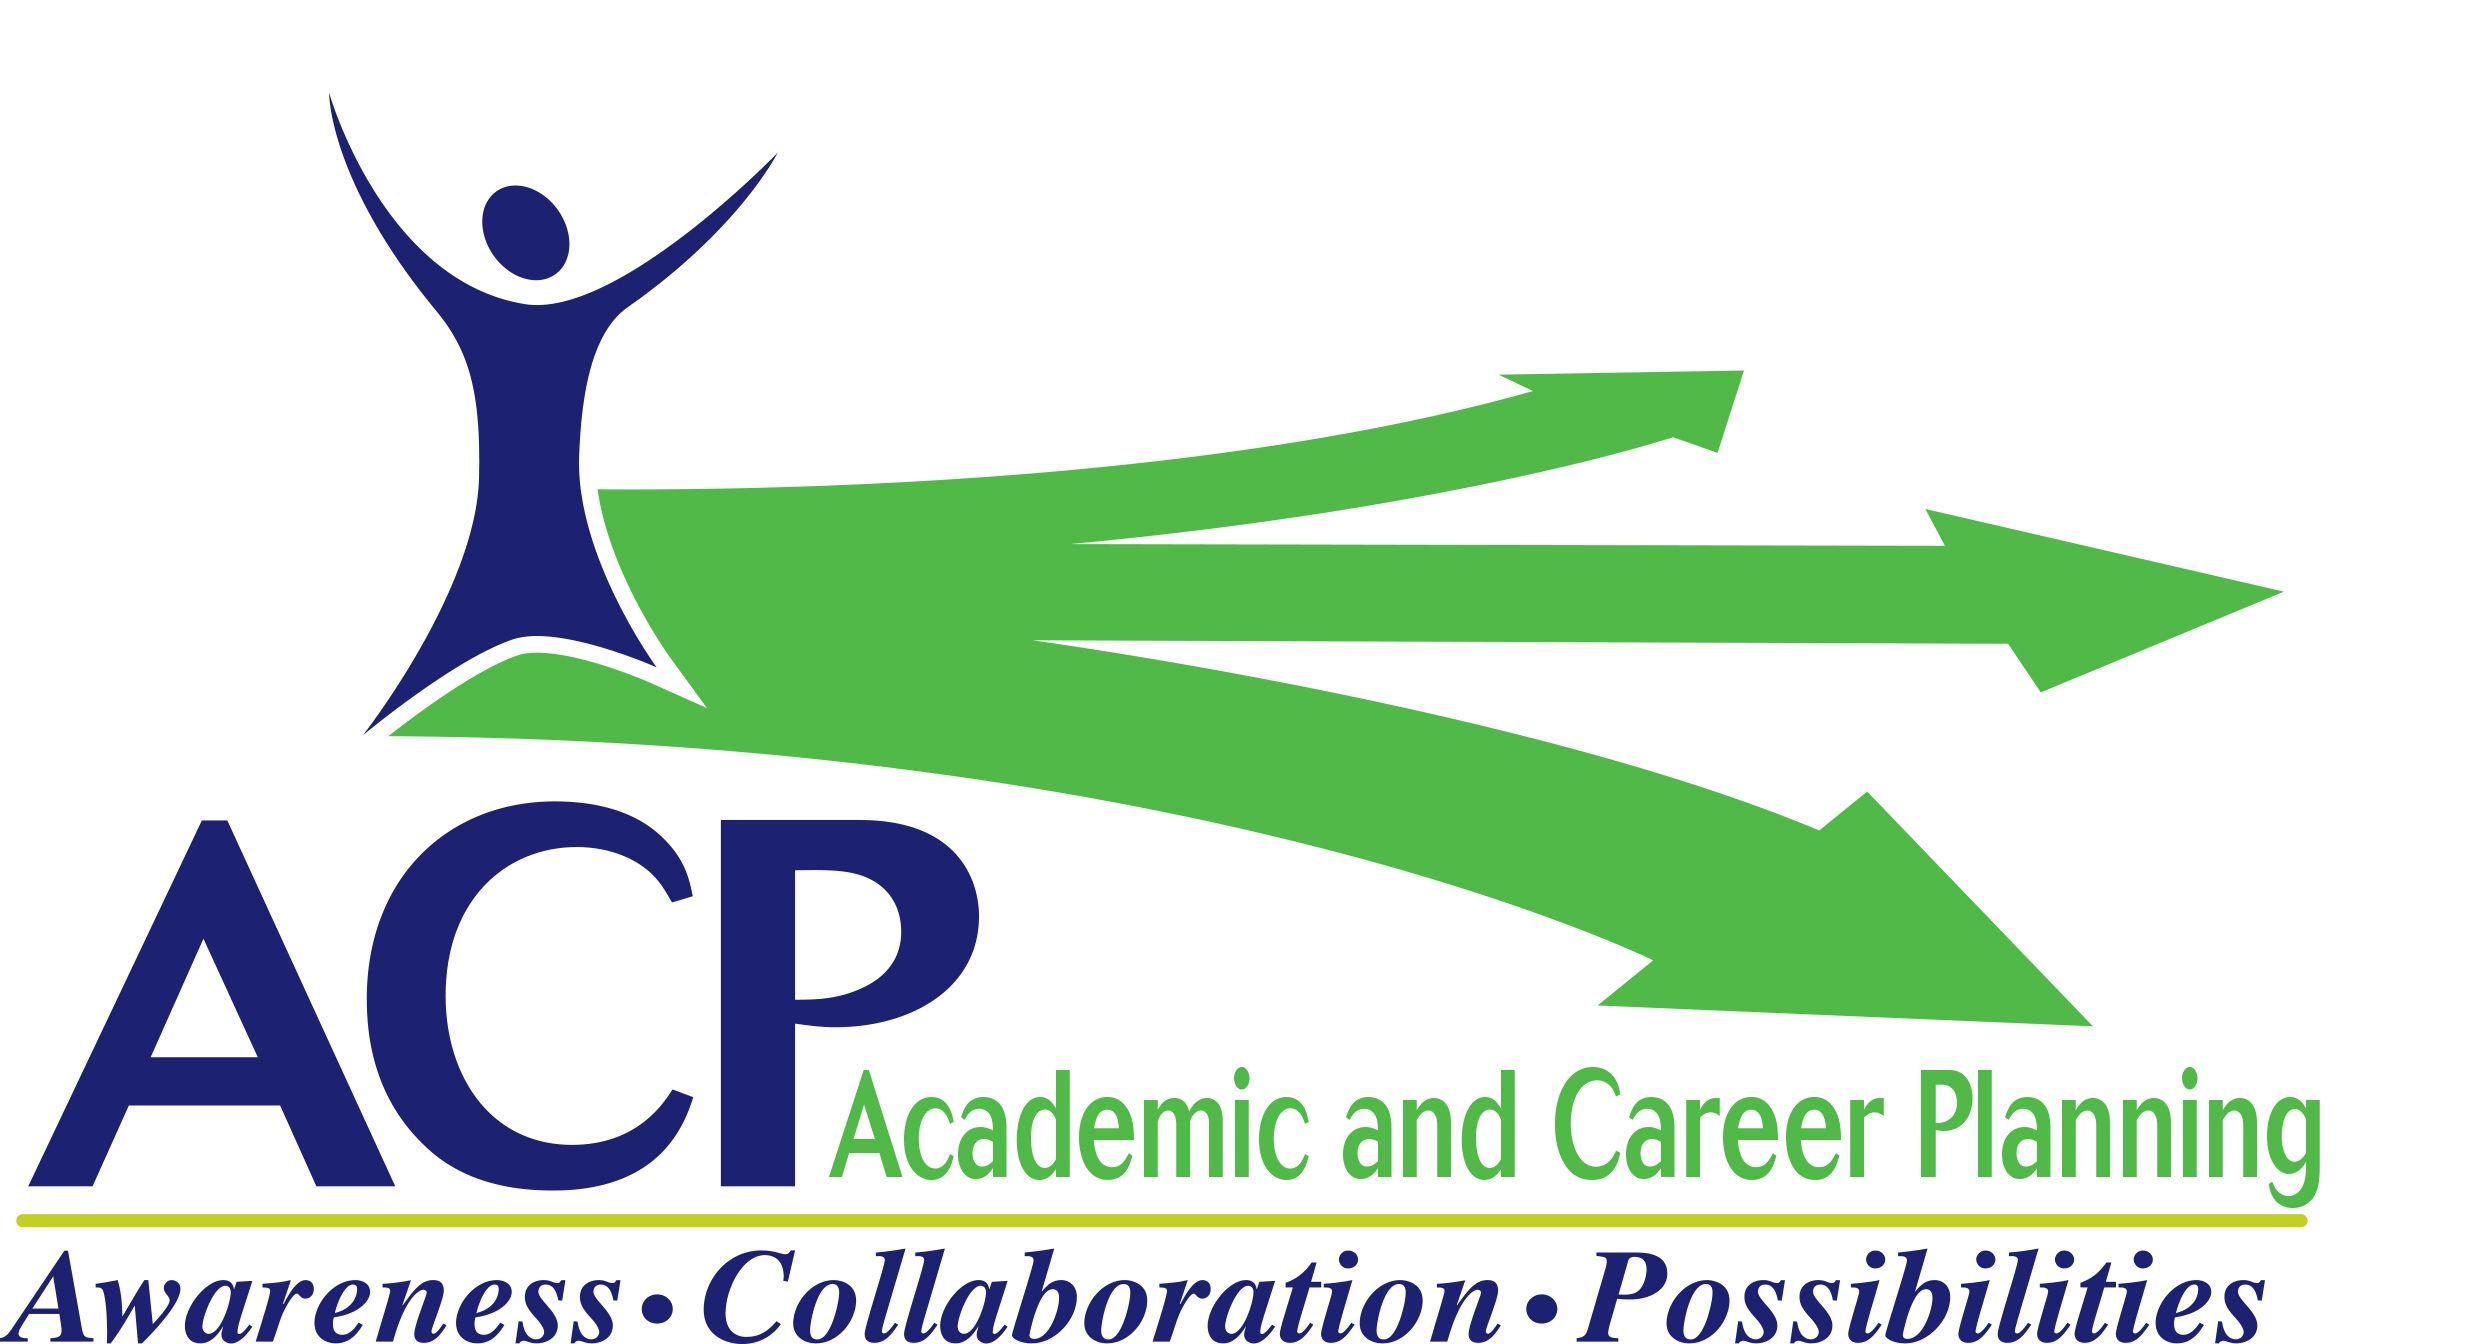 ACP Logo - Academic and Career Planning - Green Bay Area Public School District